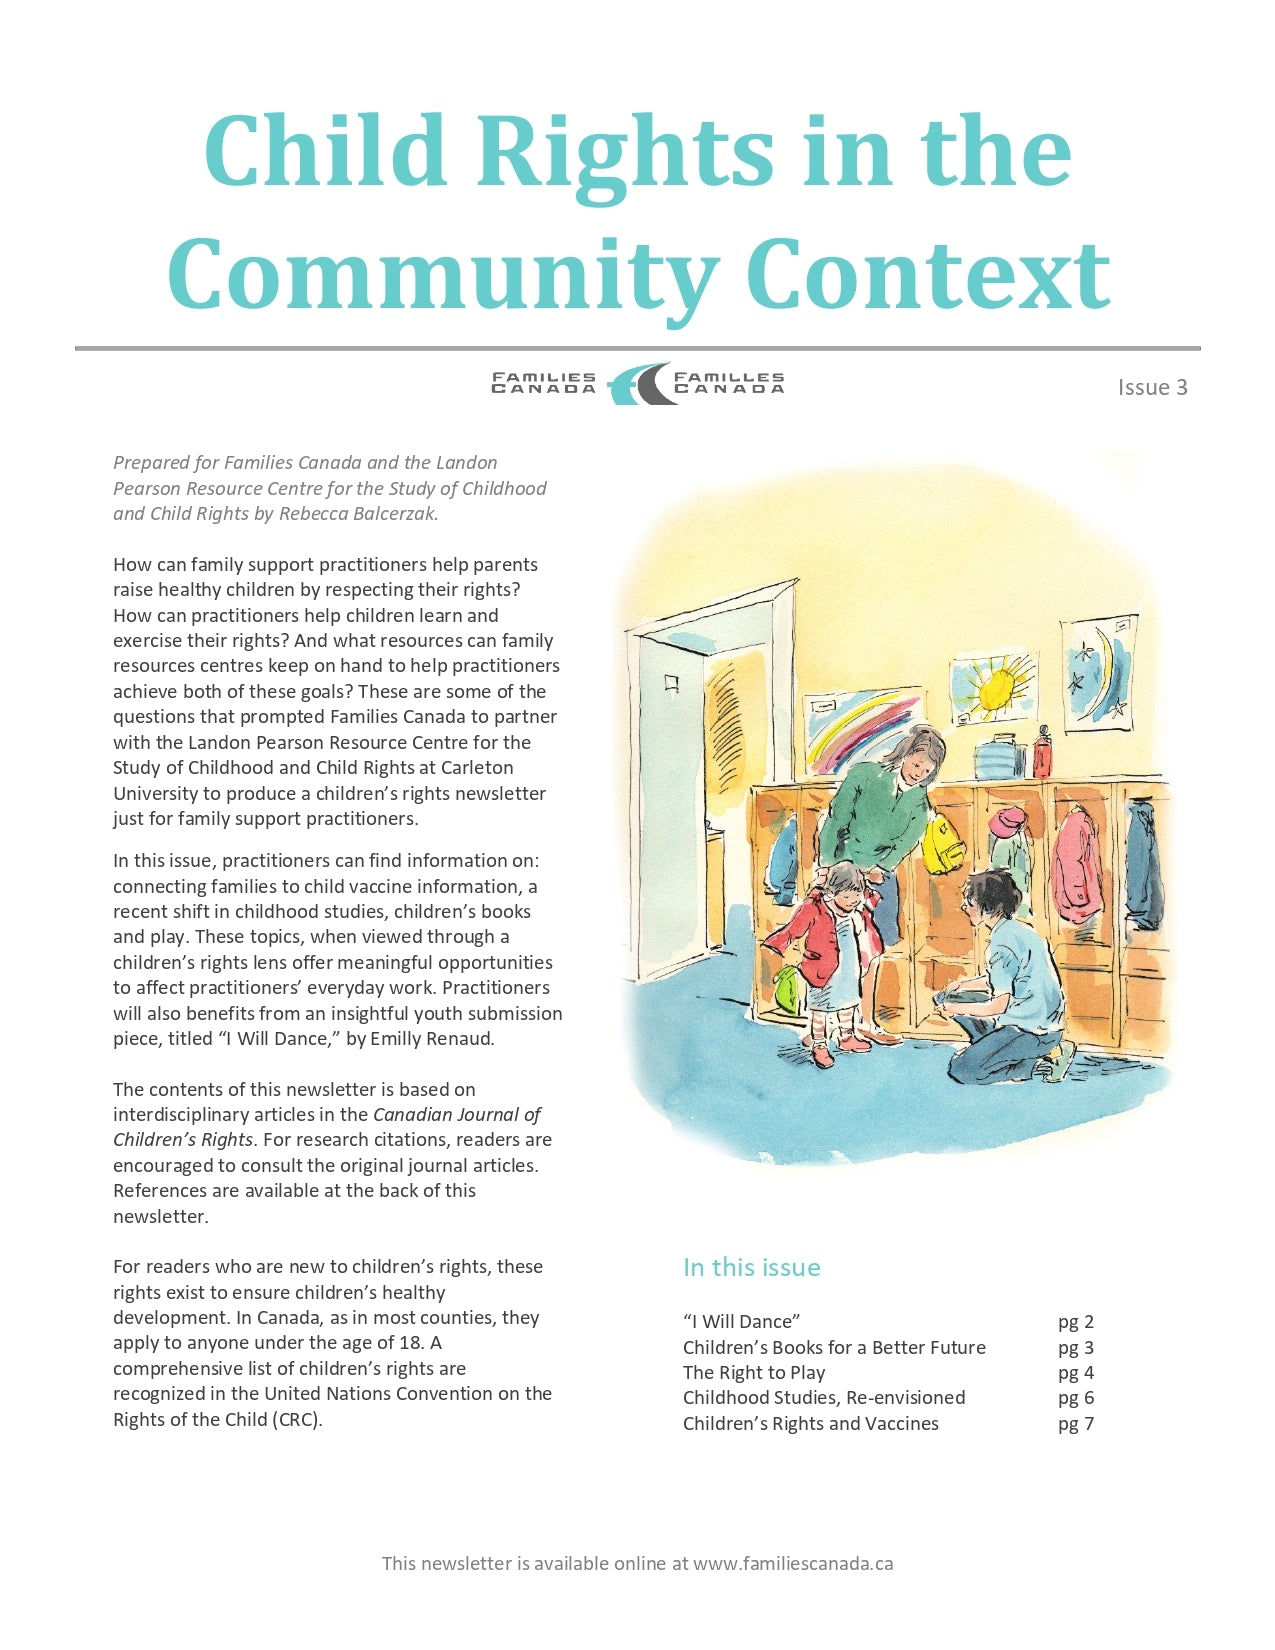 Child Rights in the Community Context